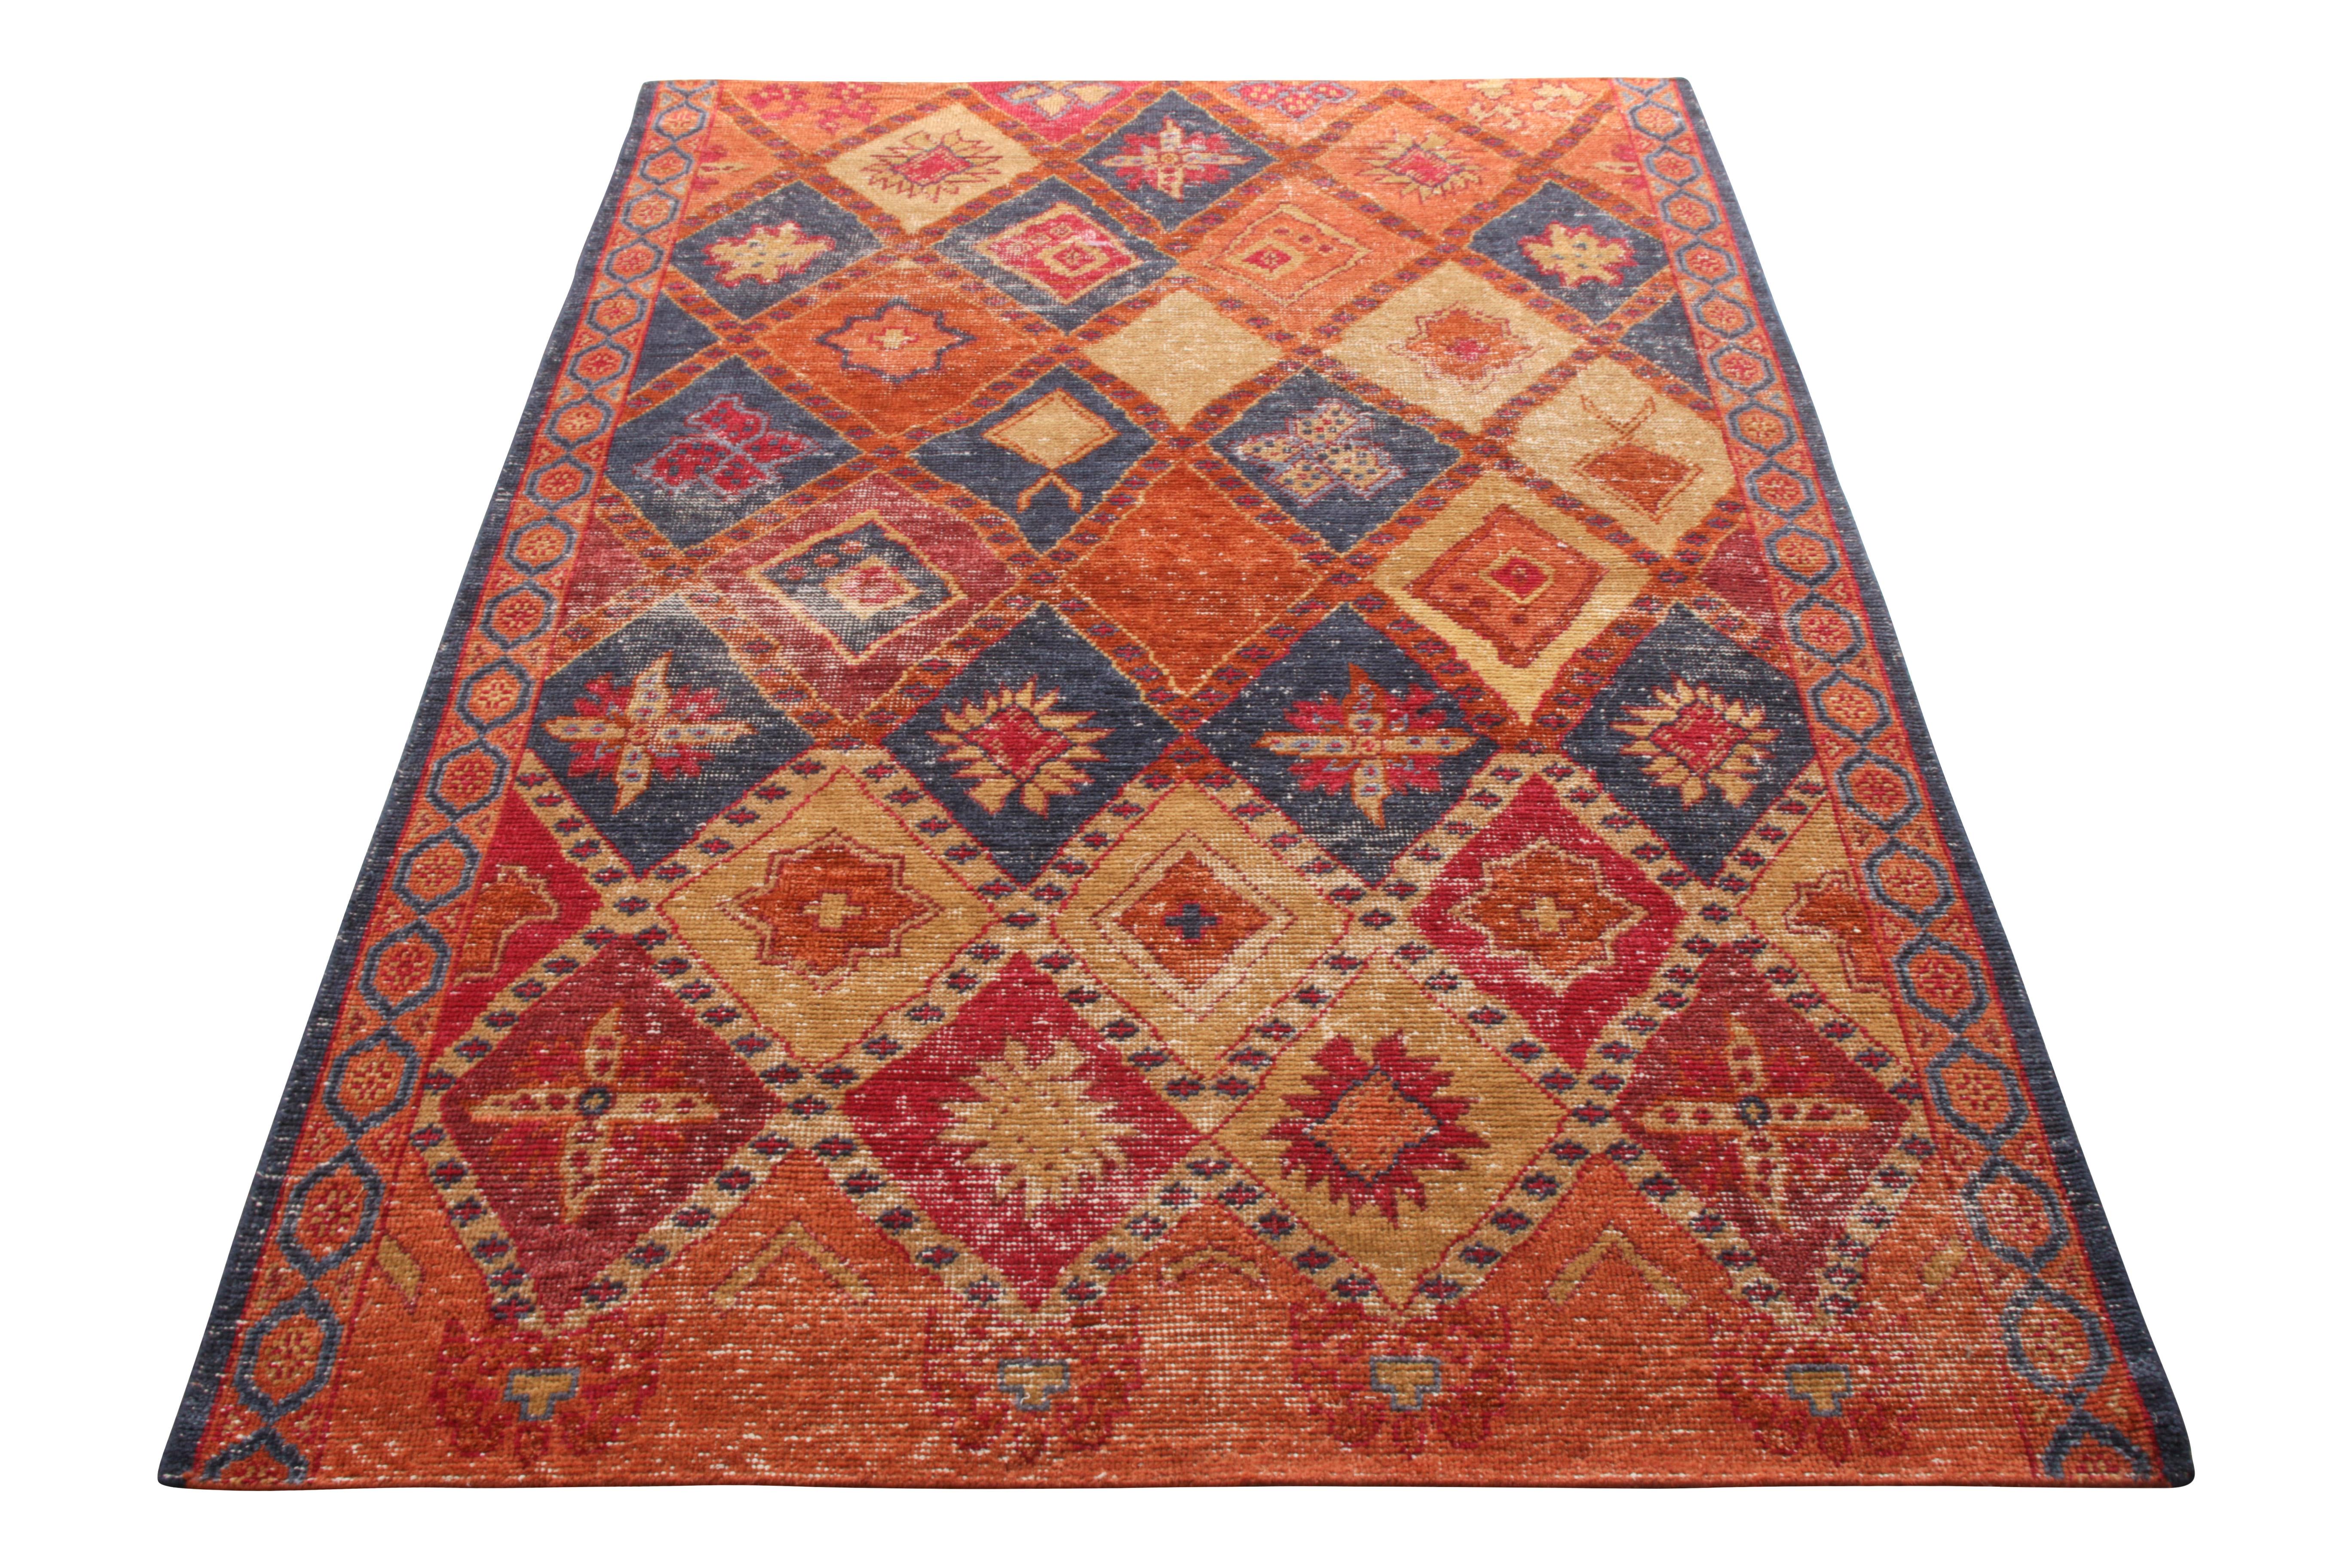 A custom rug piece with classic aesthetics in distressed style belonging to Rug & Kilim’s Homage Collection. Hand knotted in wool with a shabby chic appeal, enticing the eye with an audacious selection of colors. Warm and bright orange and red tones